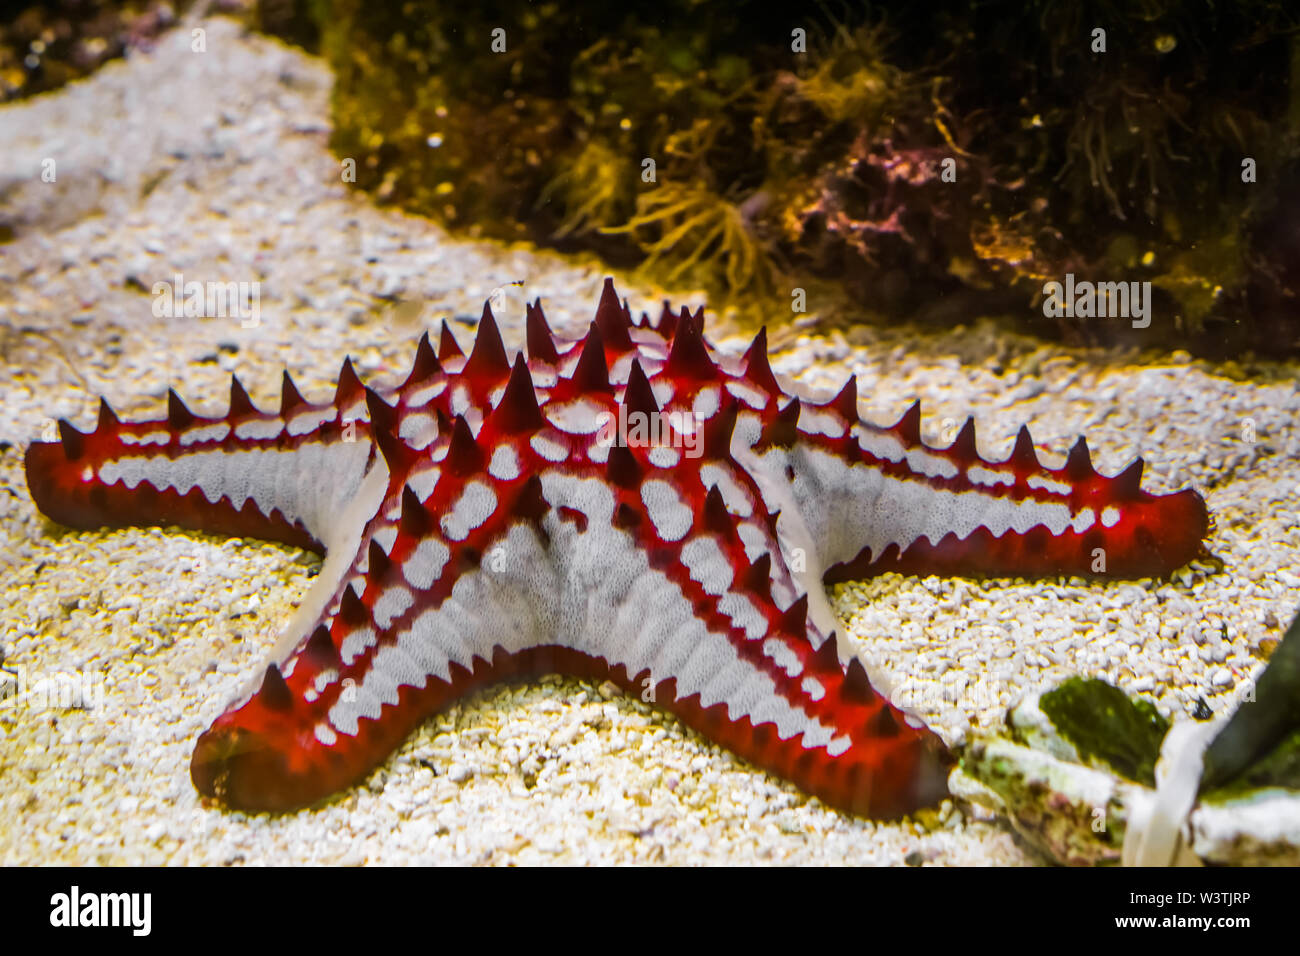 beautiful african red knob sea star in closeup, tropical starfish specie from the indo-pacific ocean Stock Photo